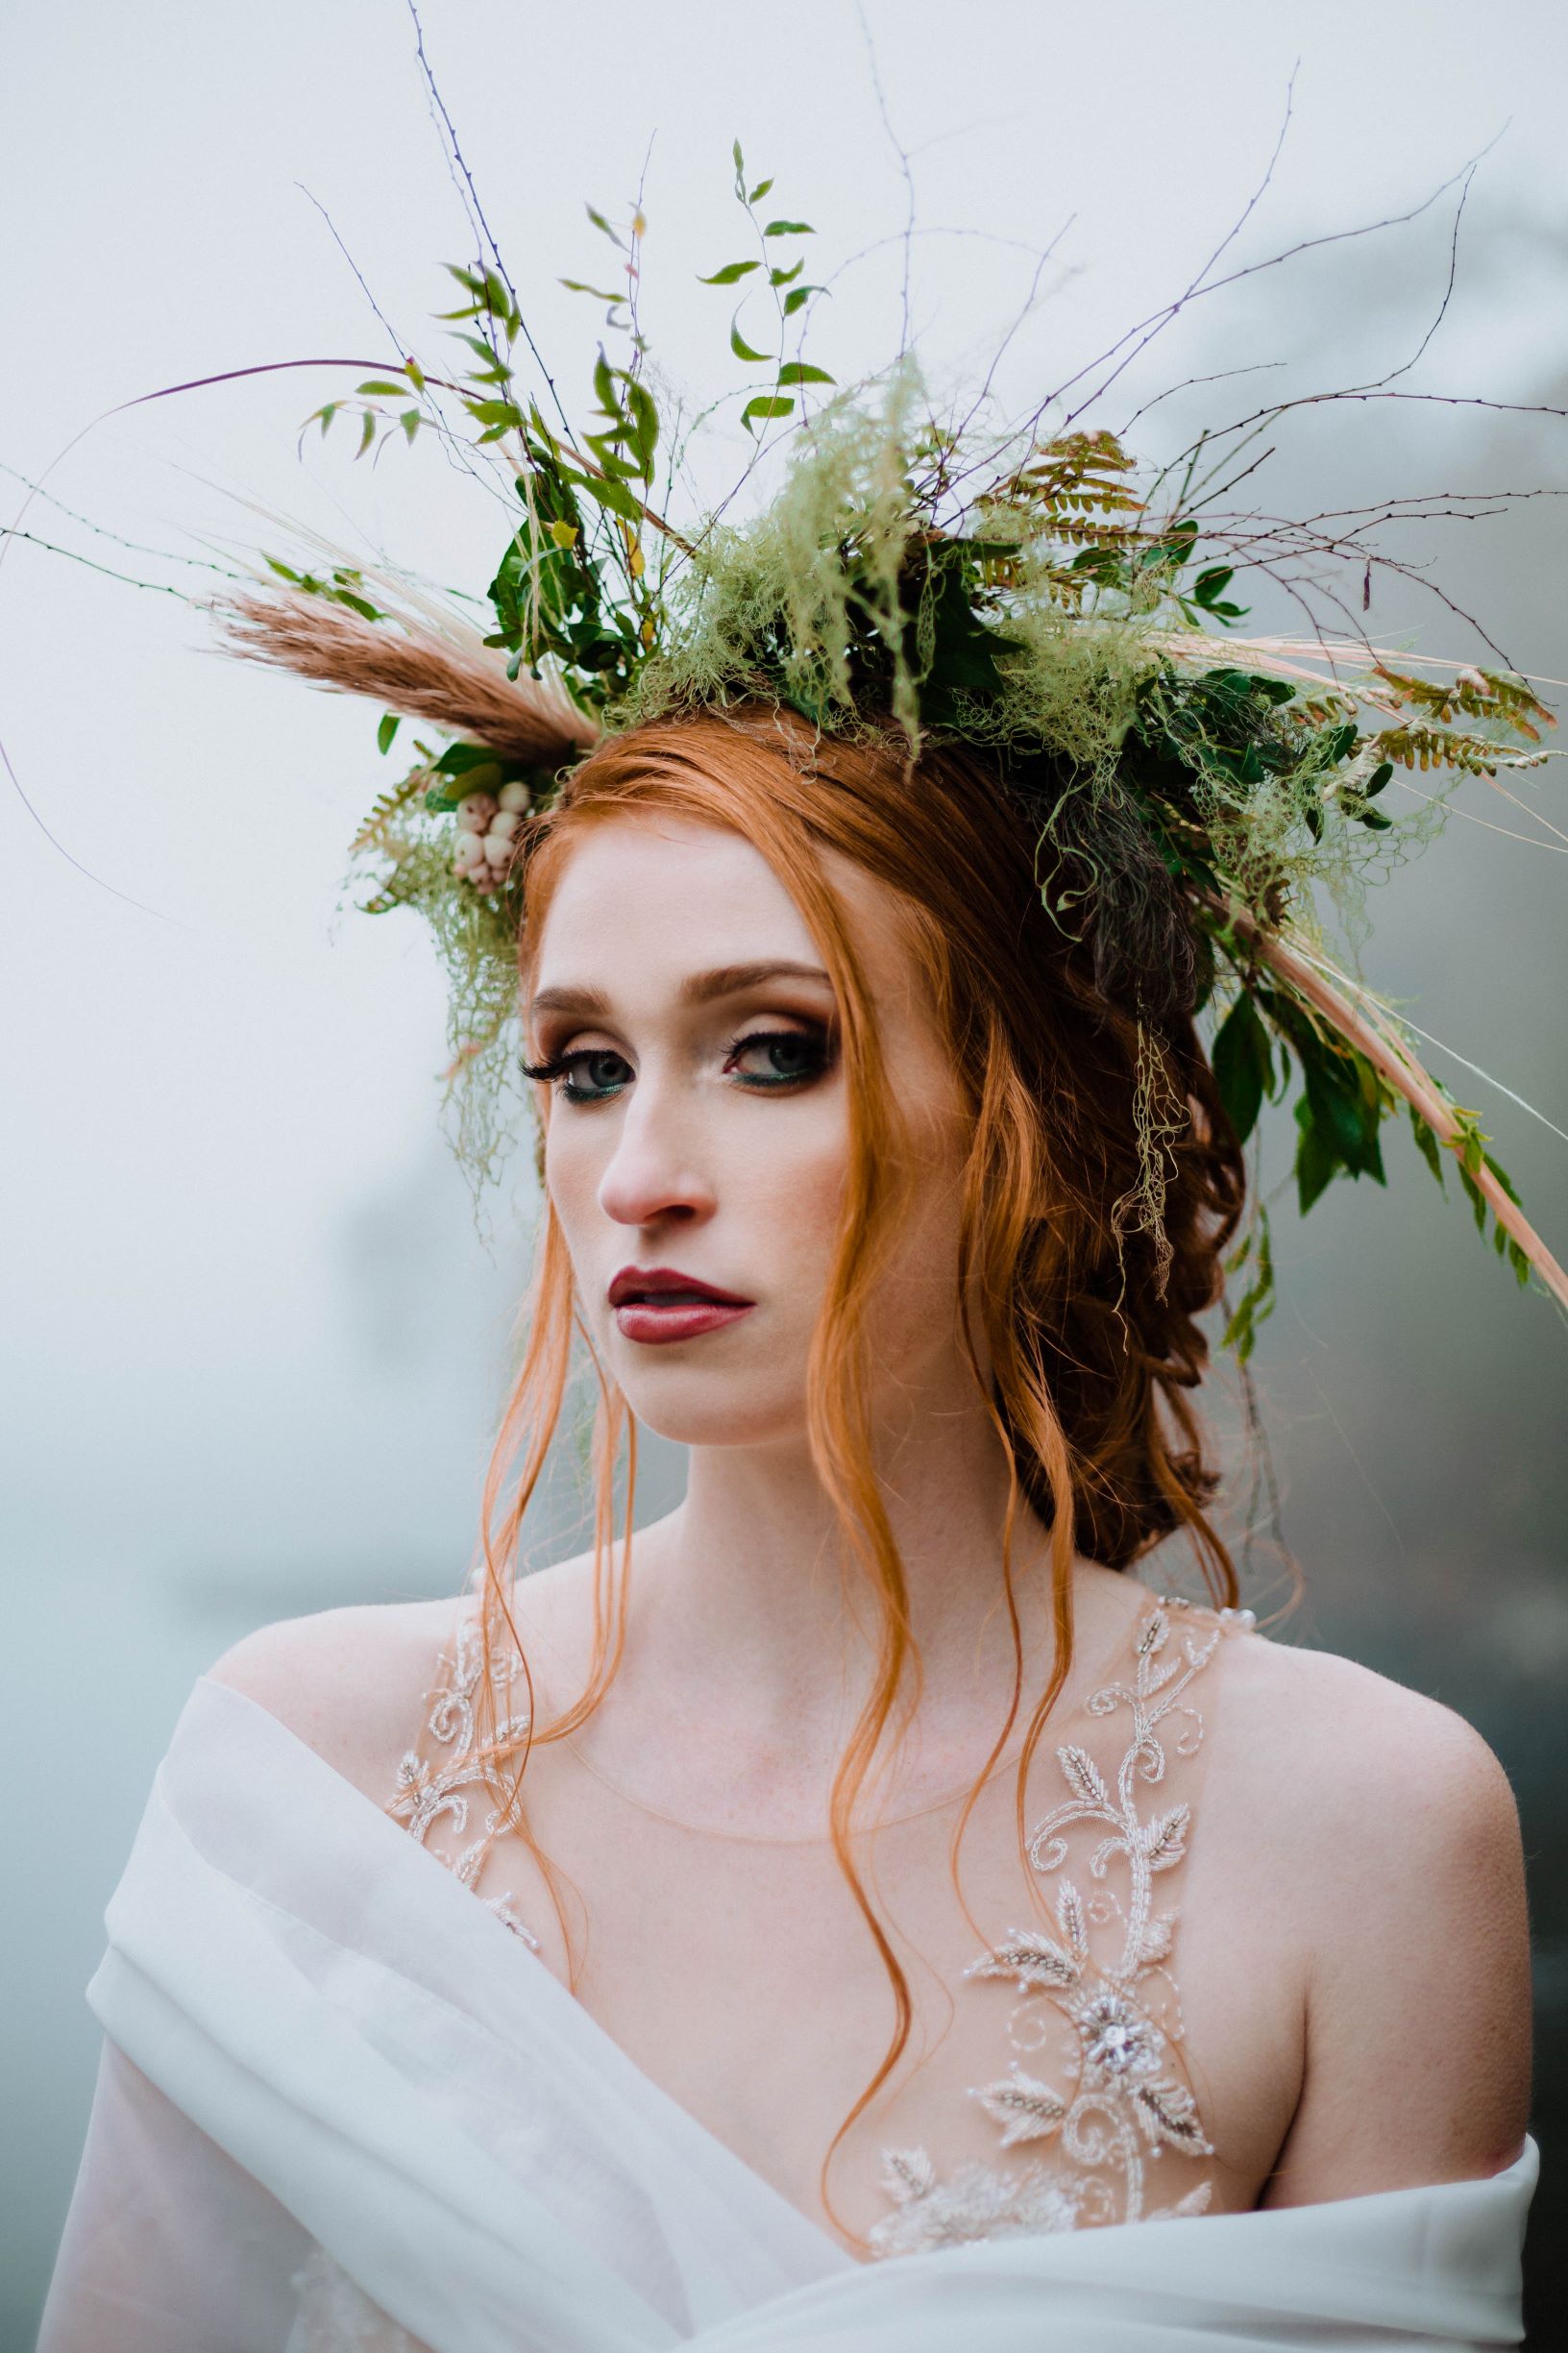 Celtic Bride with Greenery Head Wreath of